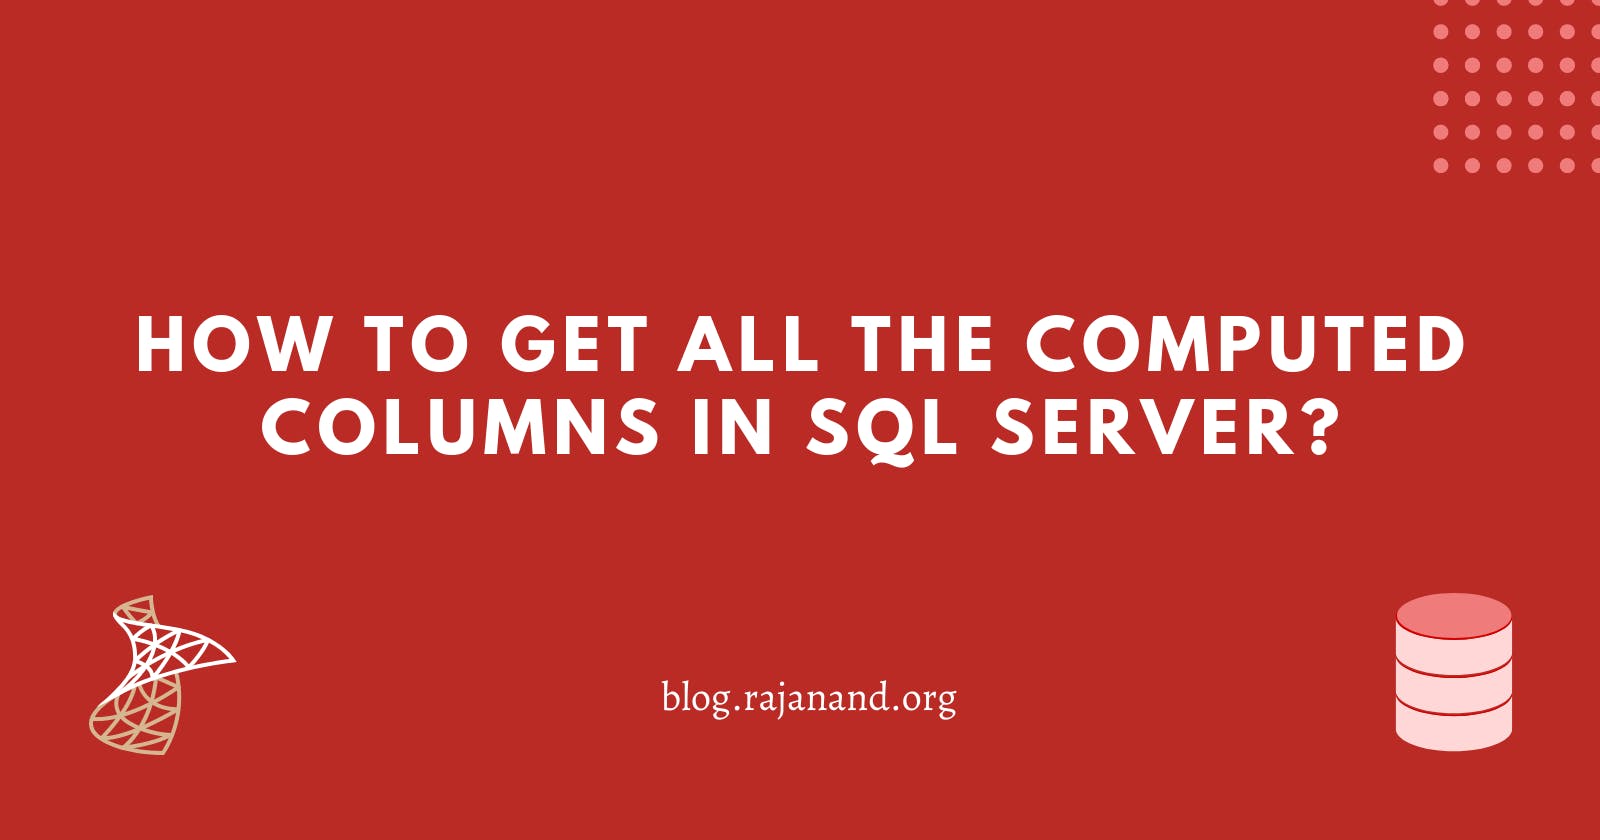 How to get all the computed columns in a database in SQL Server?